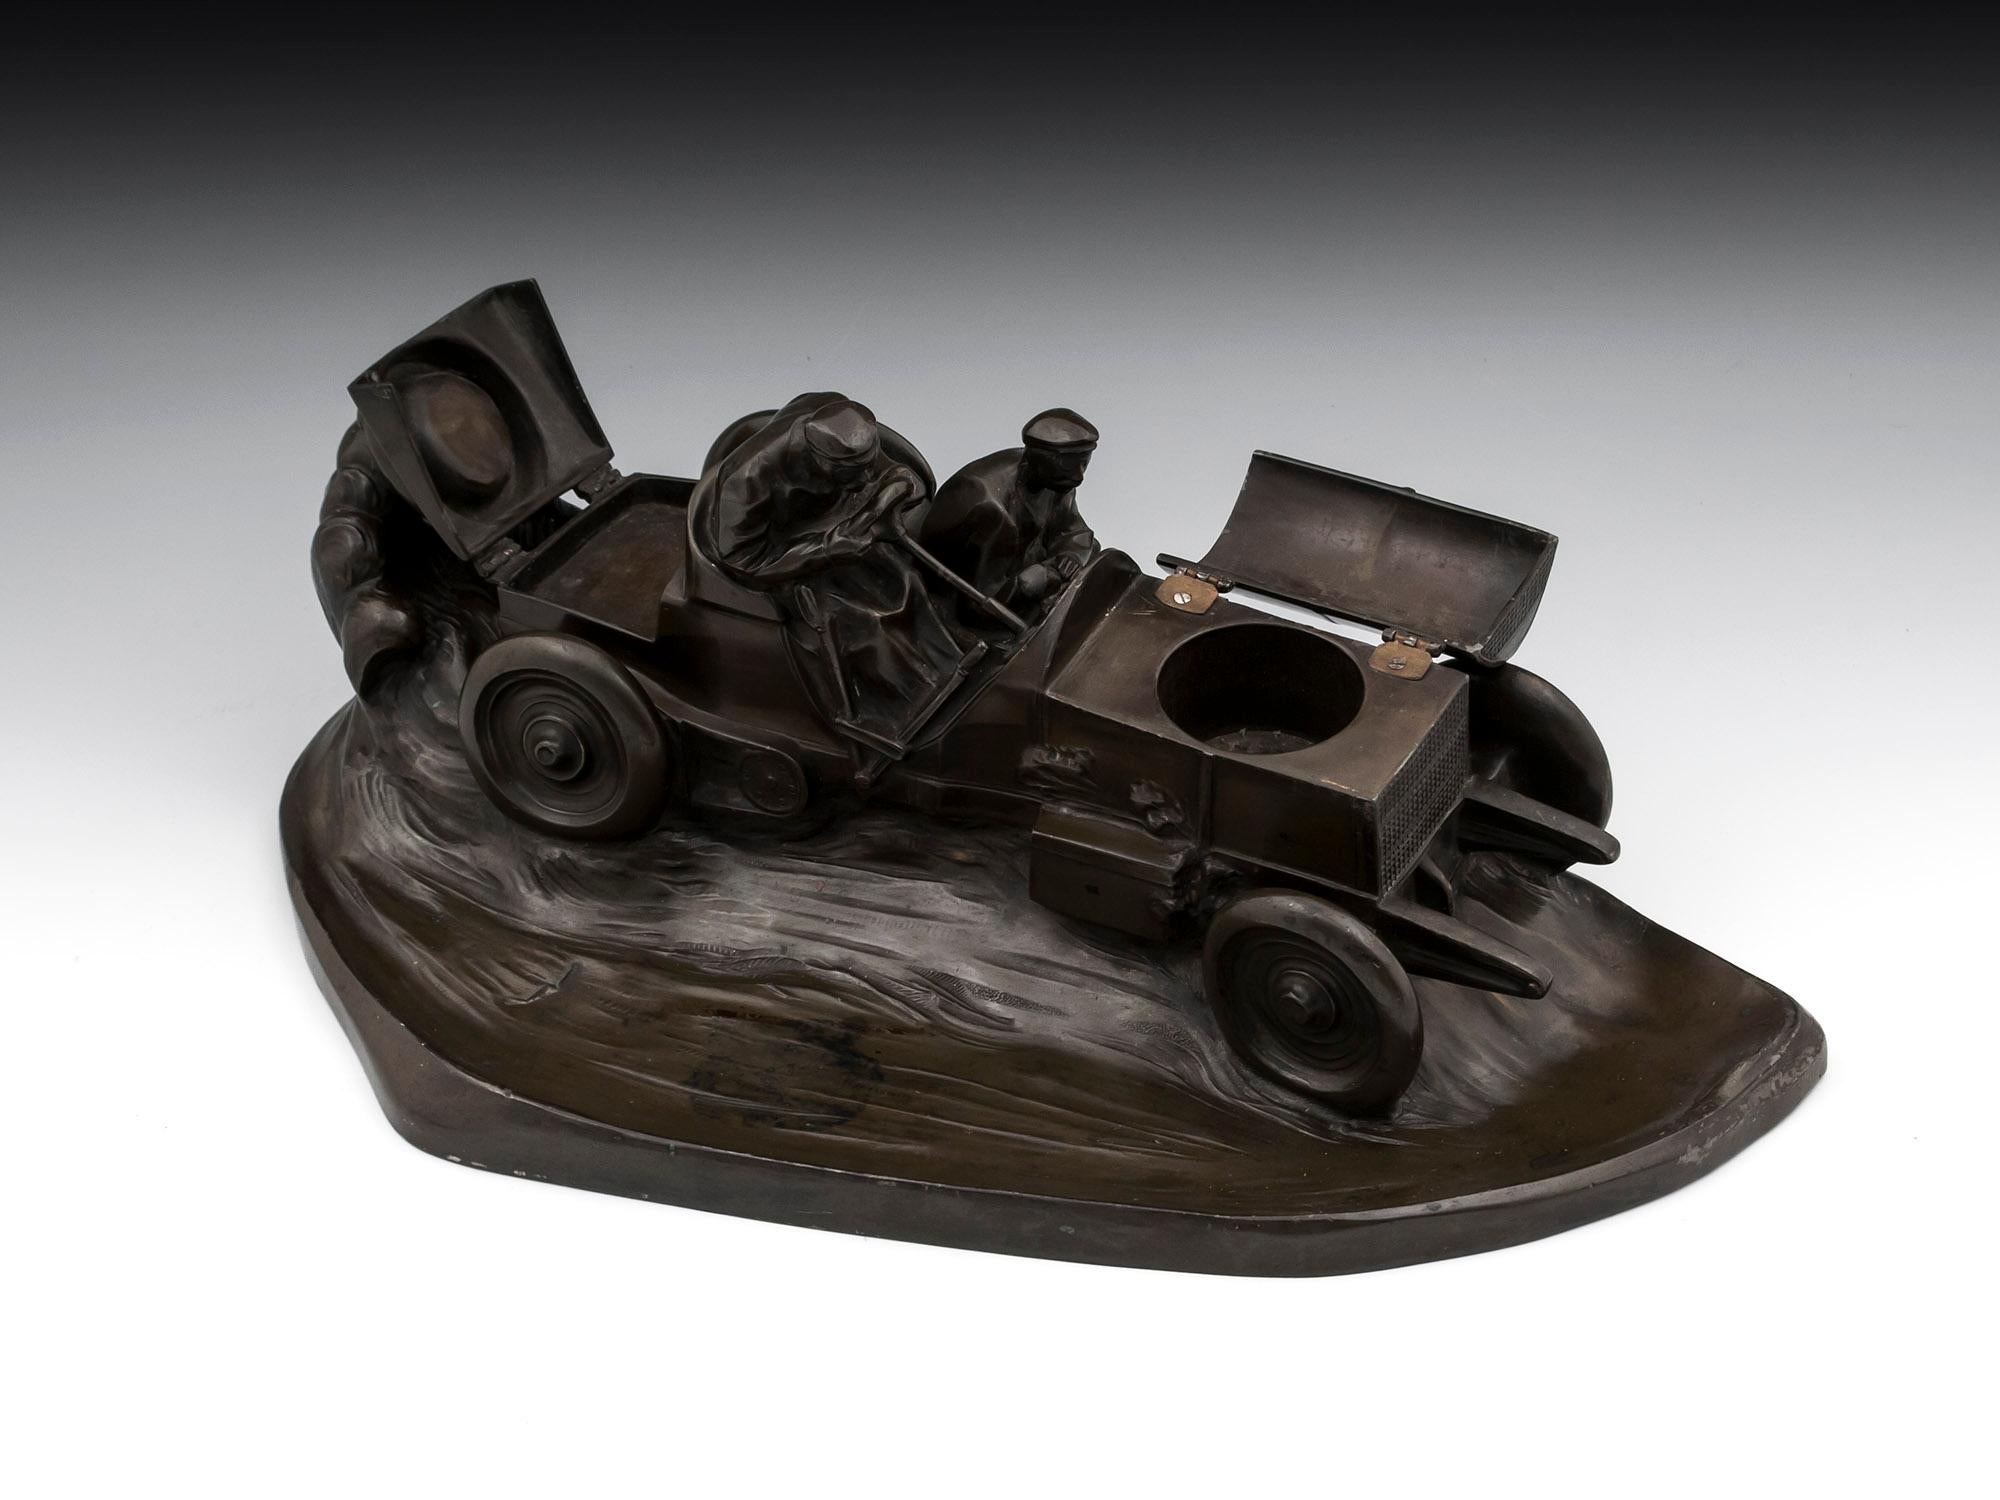 Mercedes Benz Racing Car Inkwell by Kayser of Germany 1